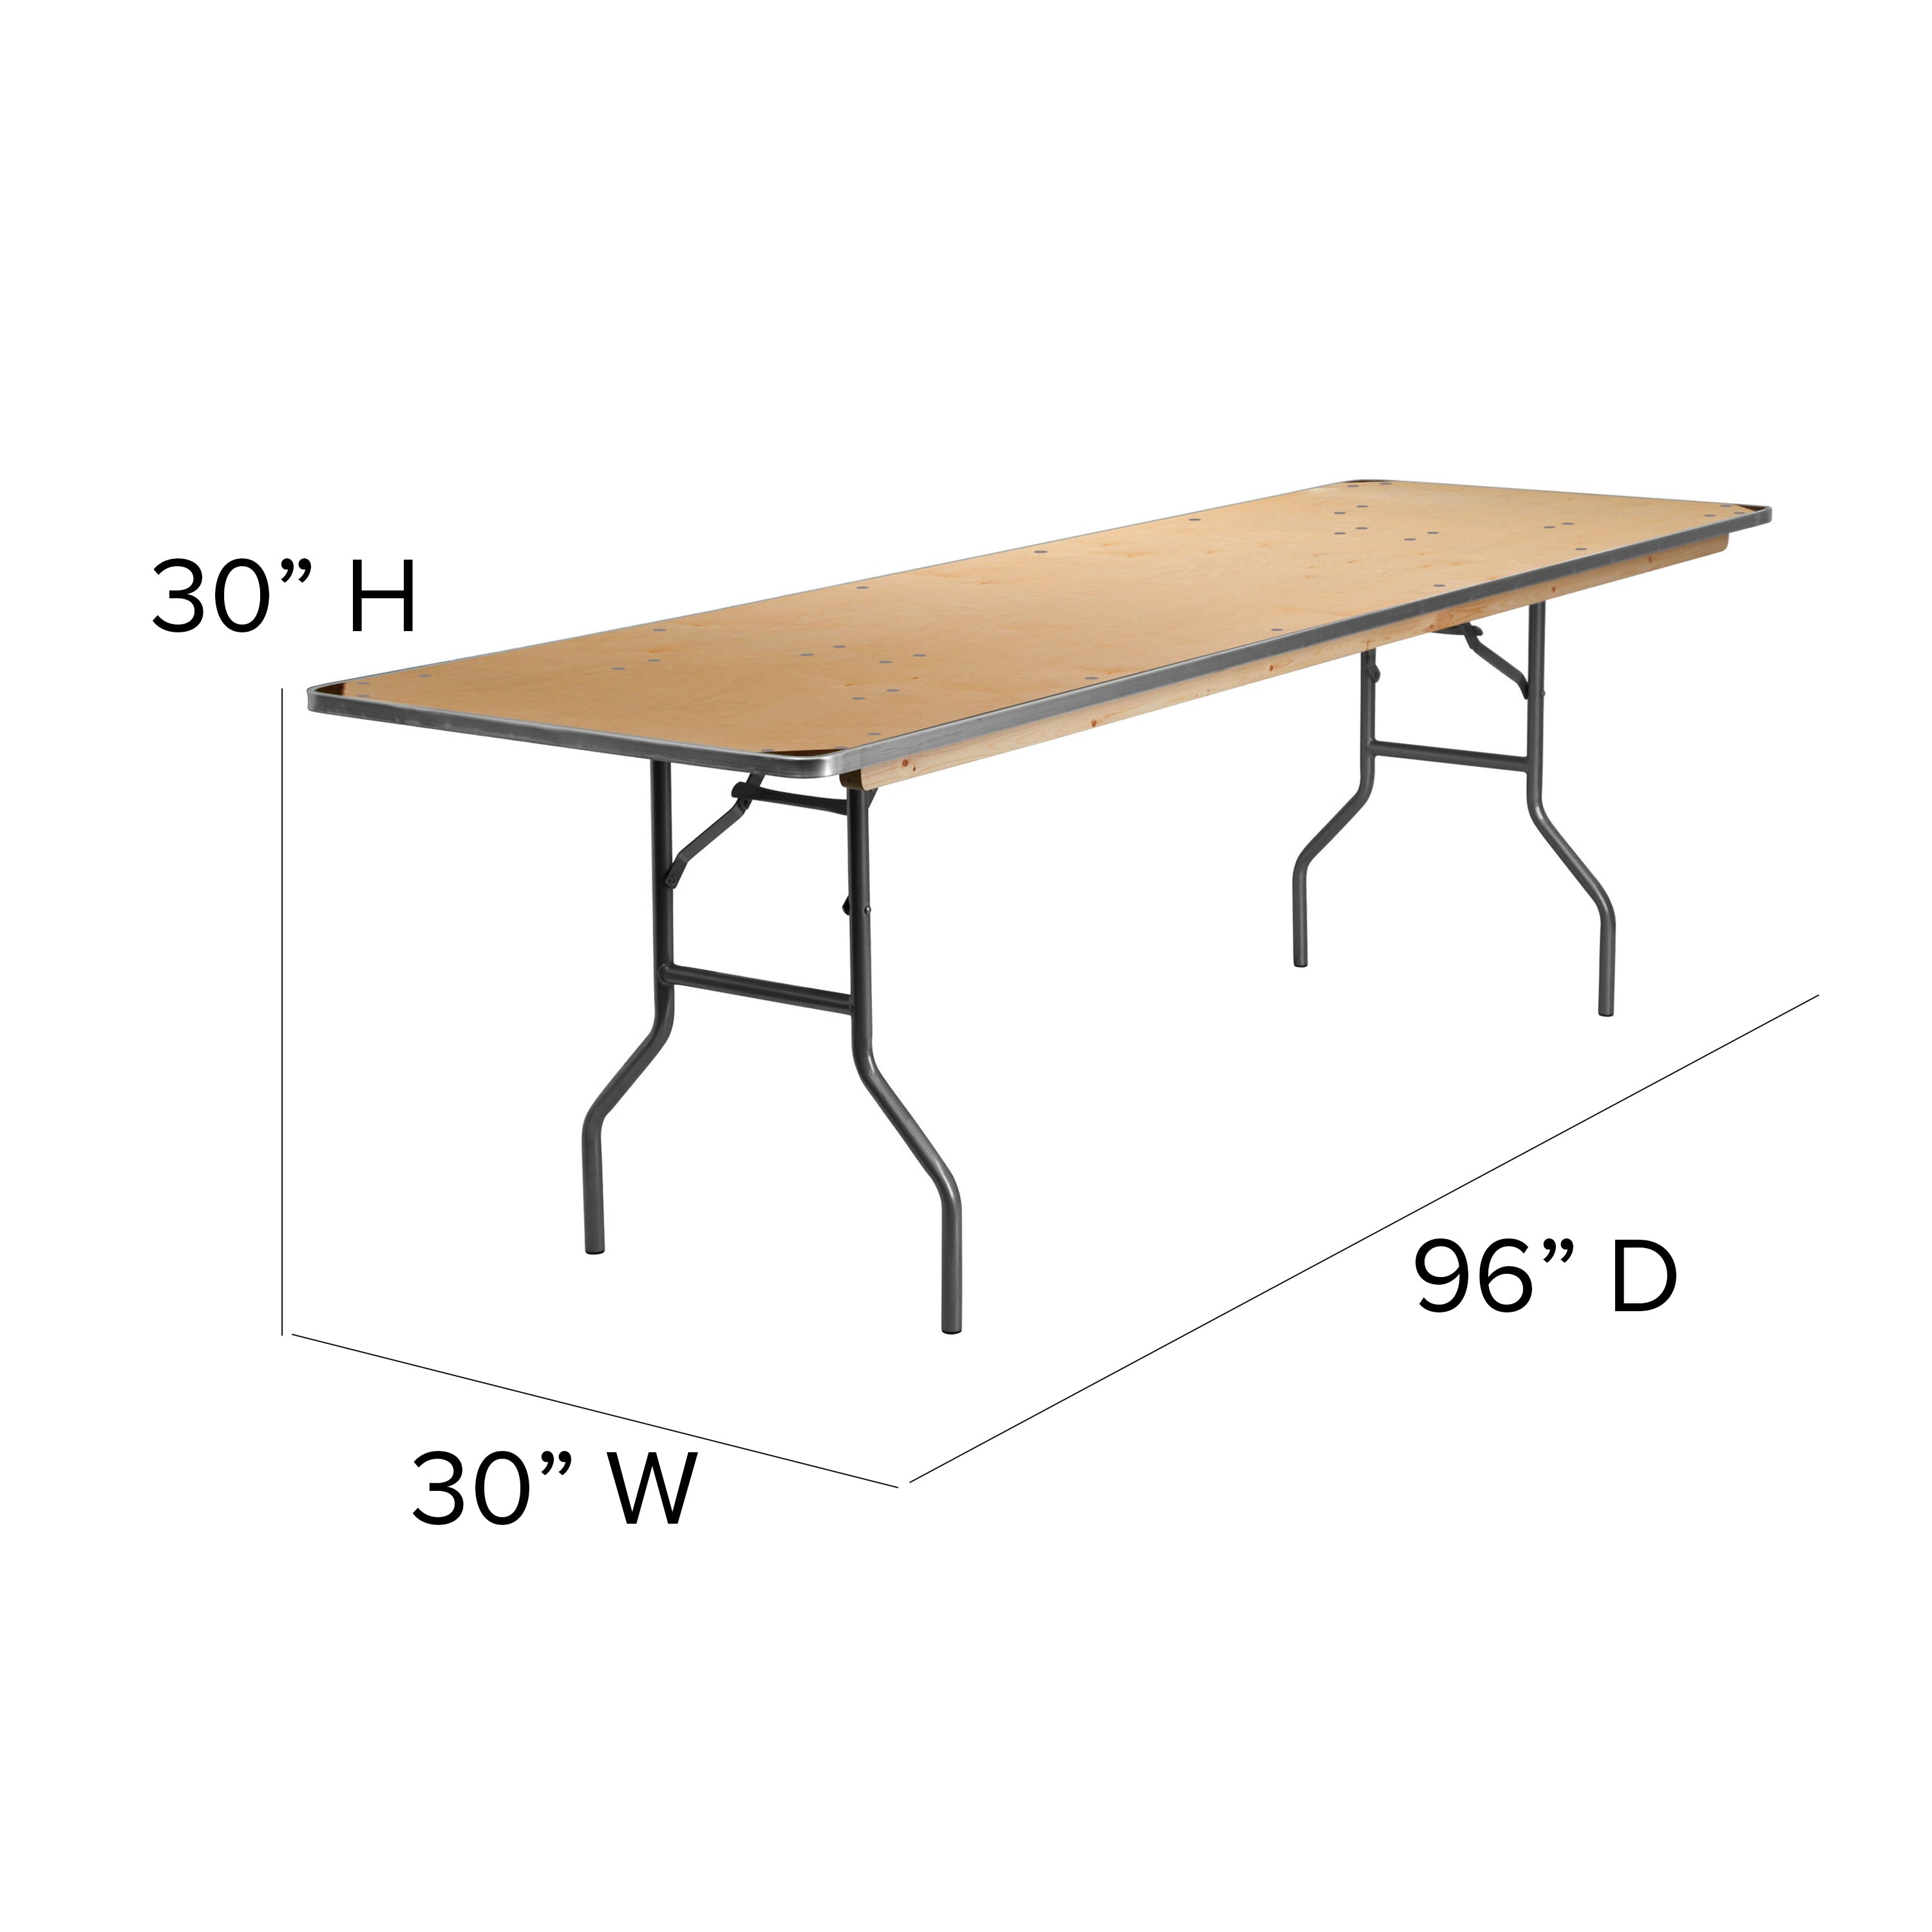 8-Foot Rectangular HEAVY DUTY Birchwood Folding Banquet Table with METAL Edges and Protective Corner Guards-Rectangular Folding Table-Flash Furniture-Wall2Wall Furnishings